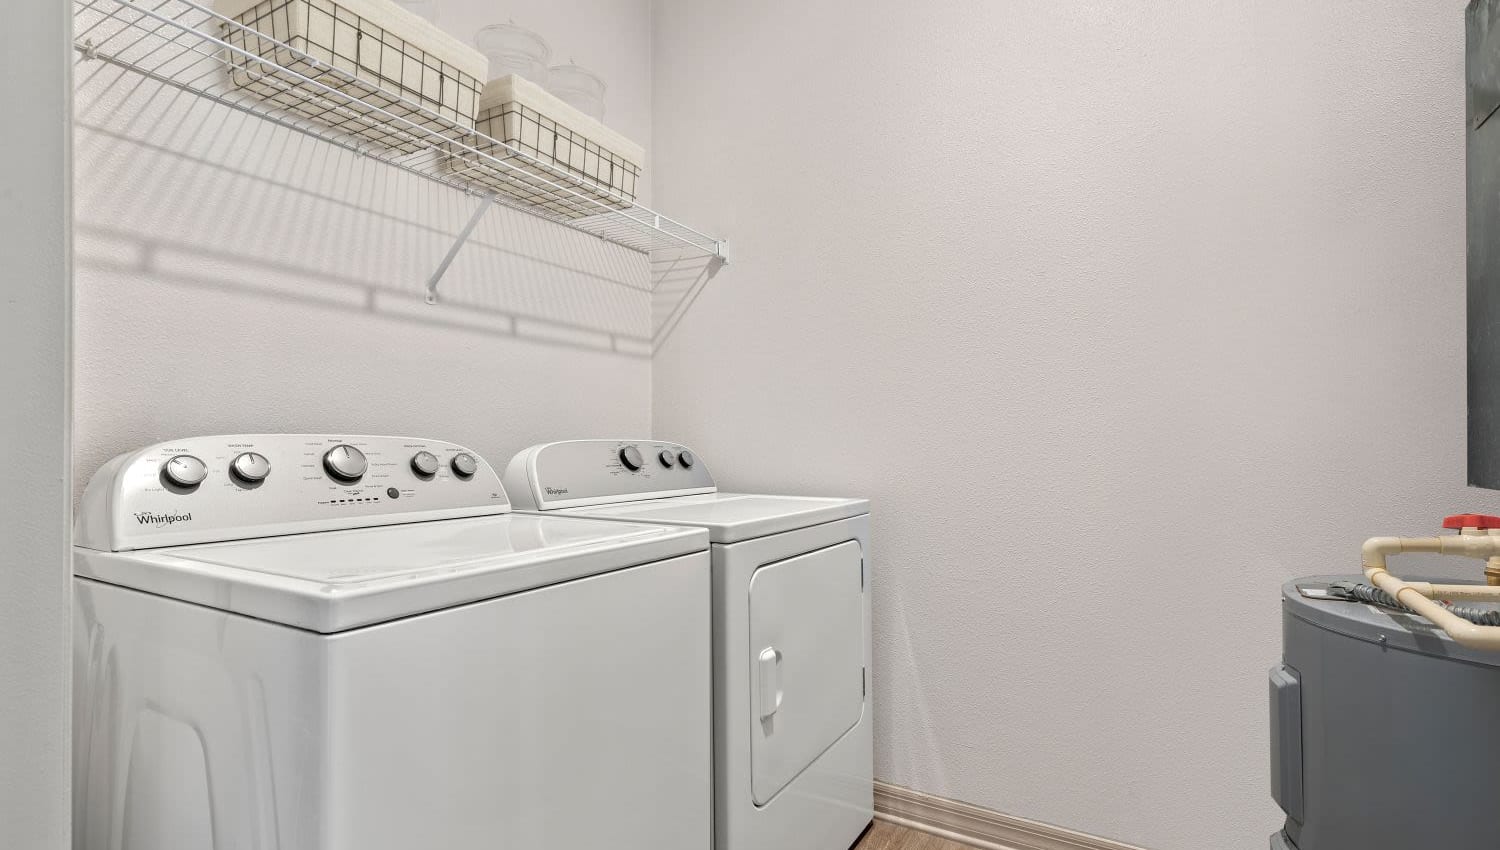 Laundry area with washing machine and dryer at Lakeline at Bartram Park in Jacksonville, Florida